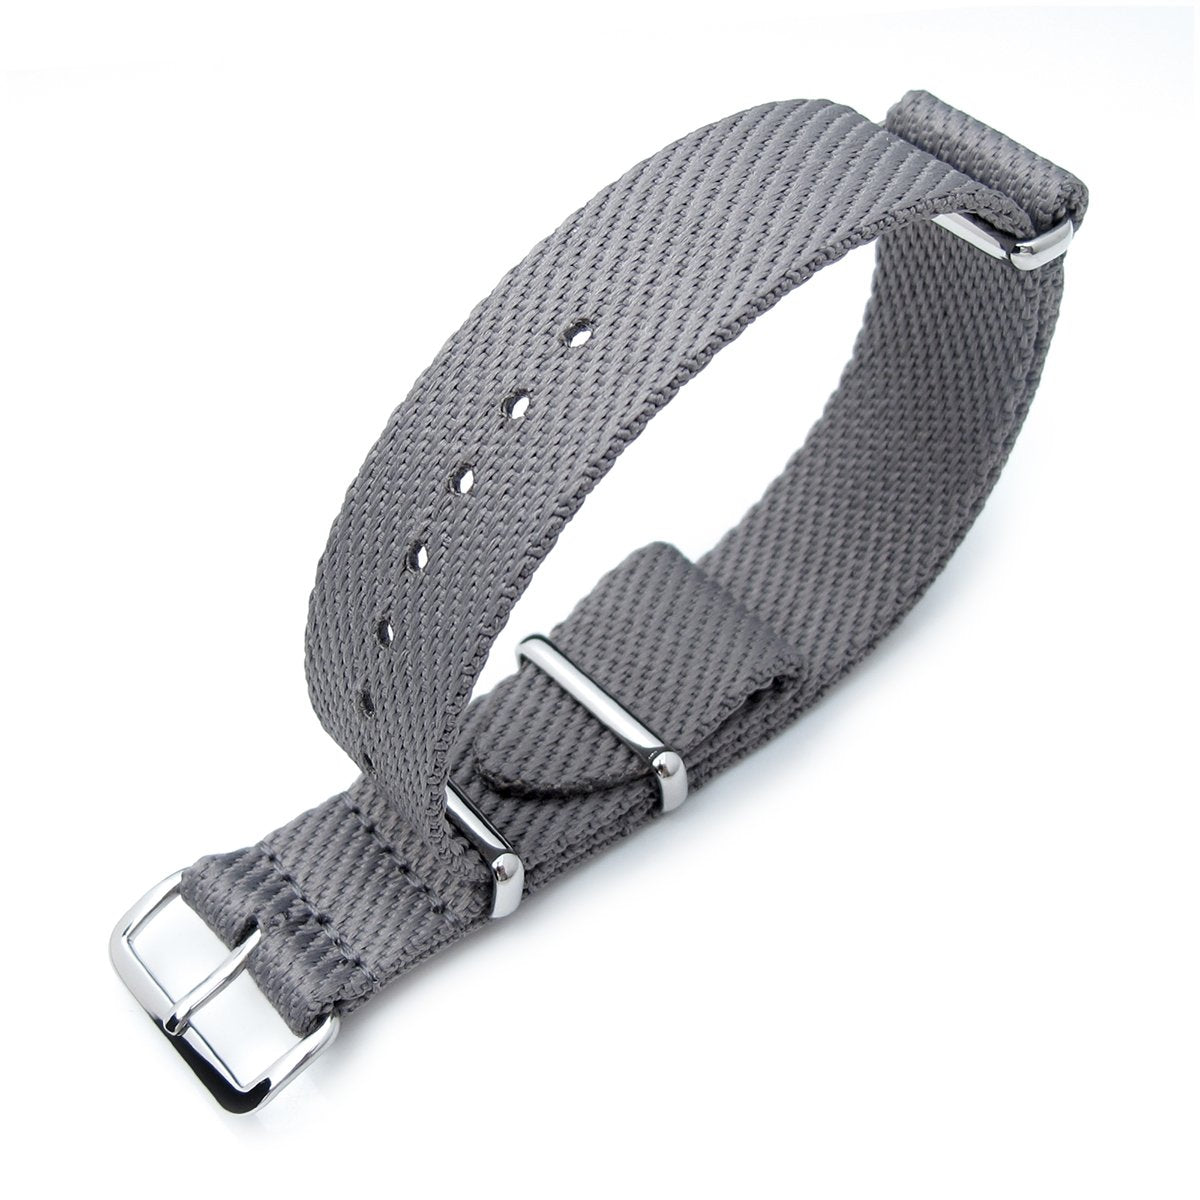 MiLTAT 20mm G10 Military NATO Watch Strap Waffle Nylon Armband Polished Military Grey Strapcode Watch Bands